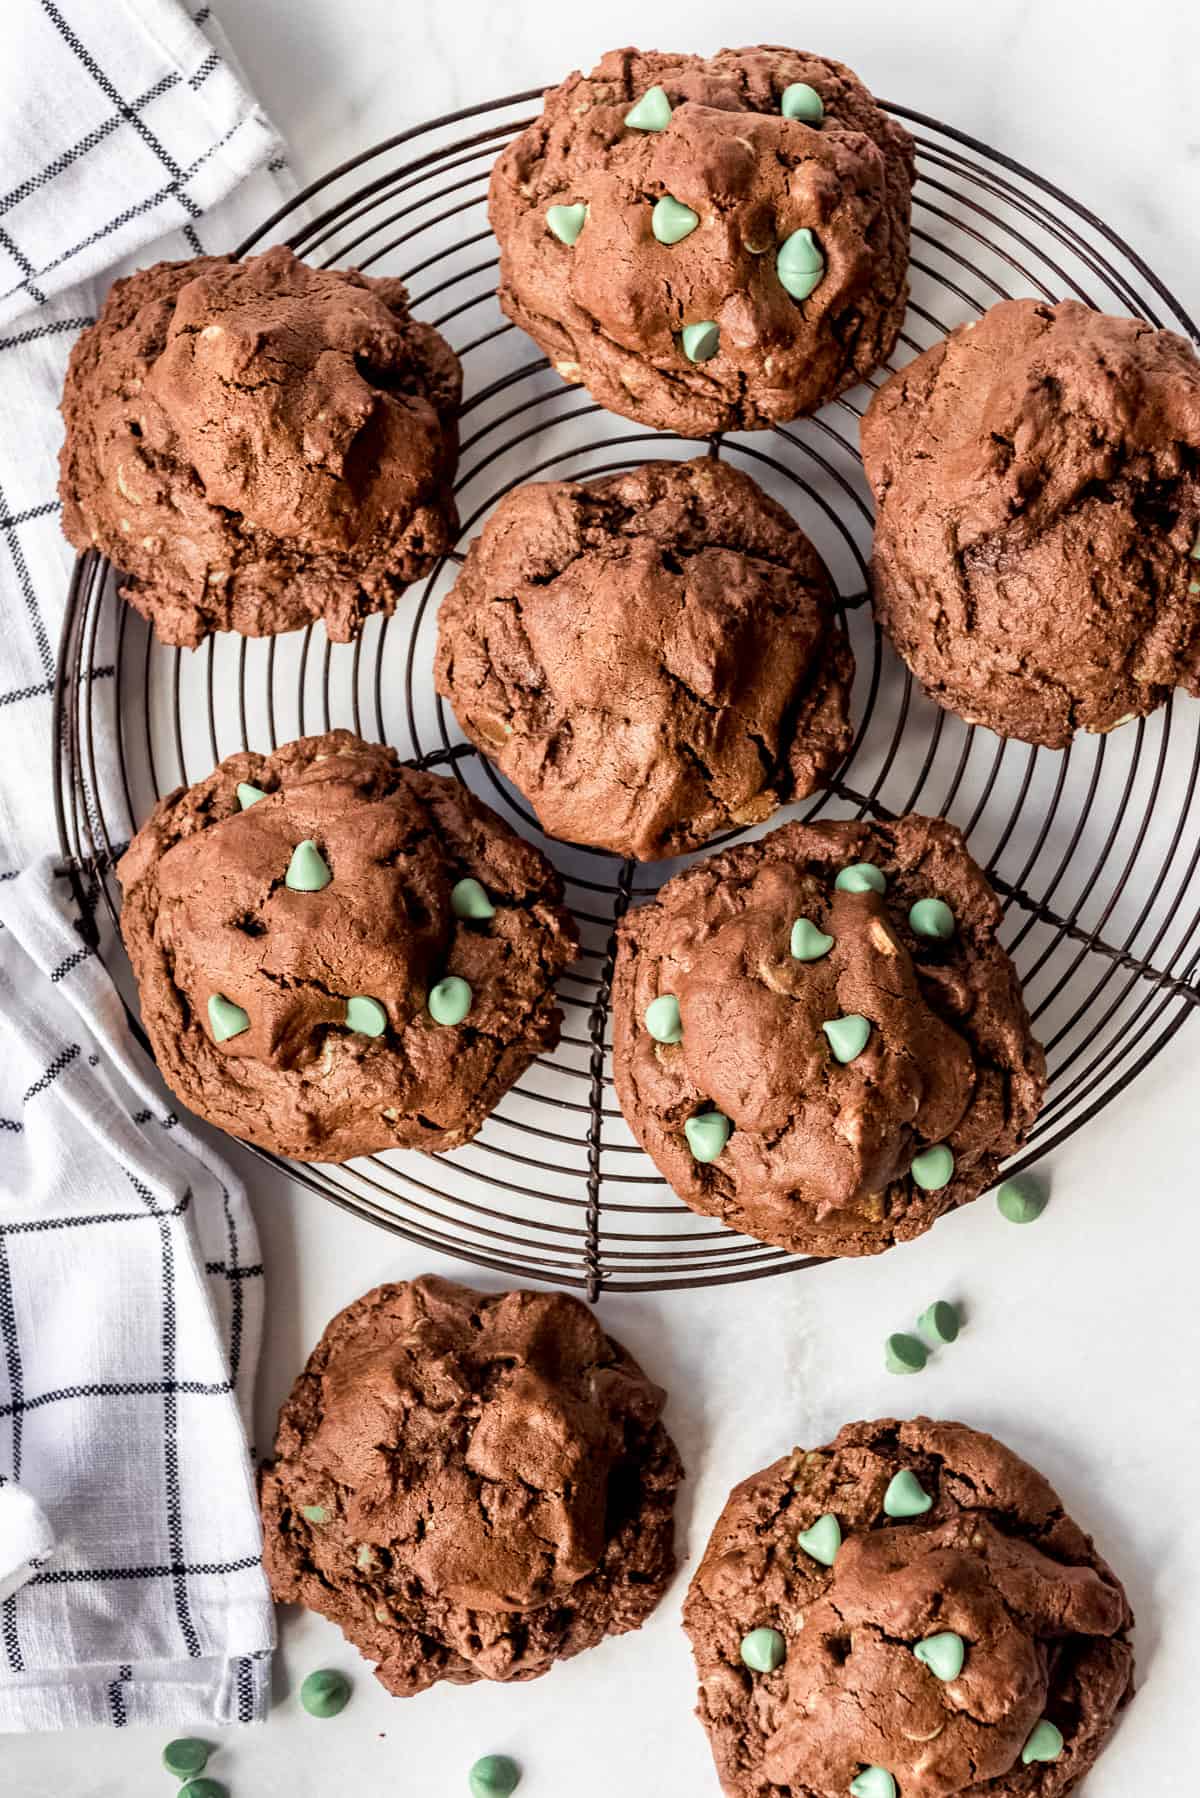 Oversized mint-chocolate cookies on a wire baking rack.